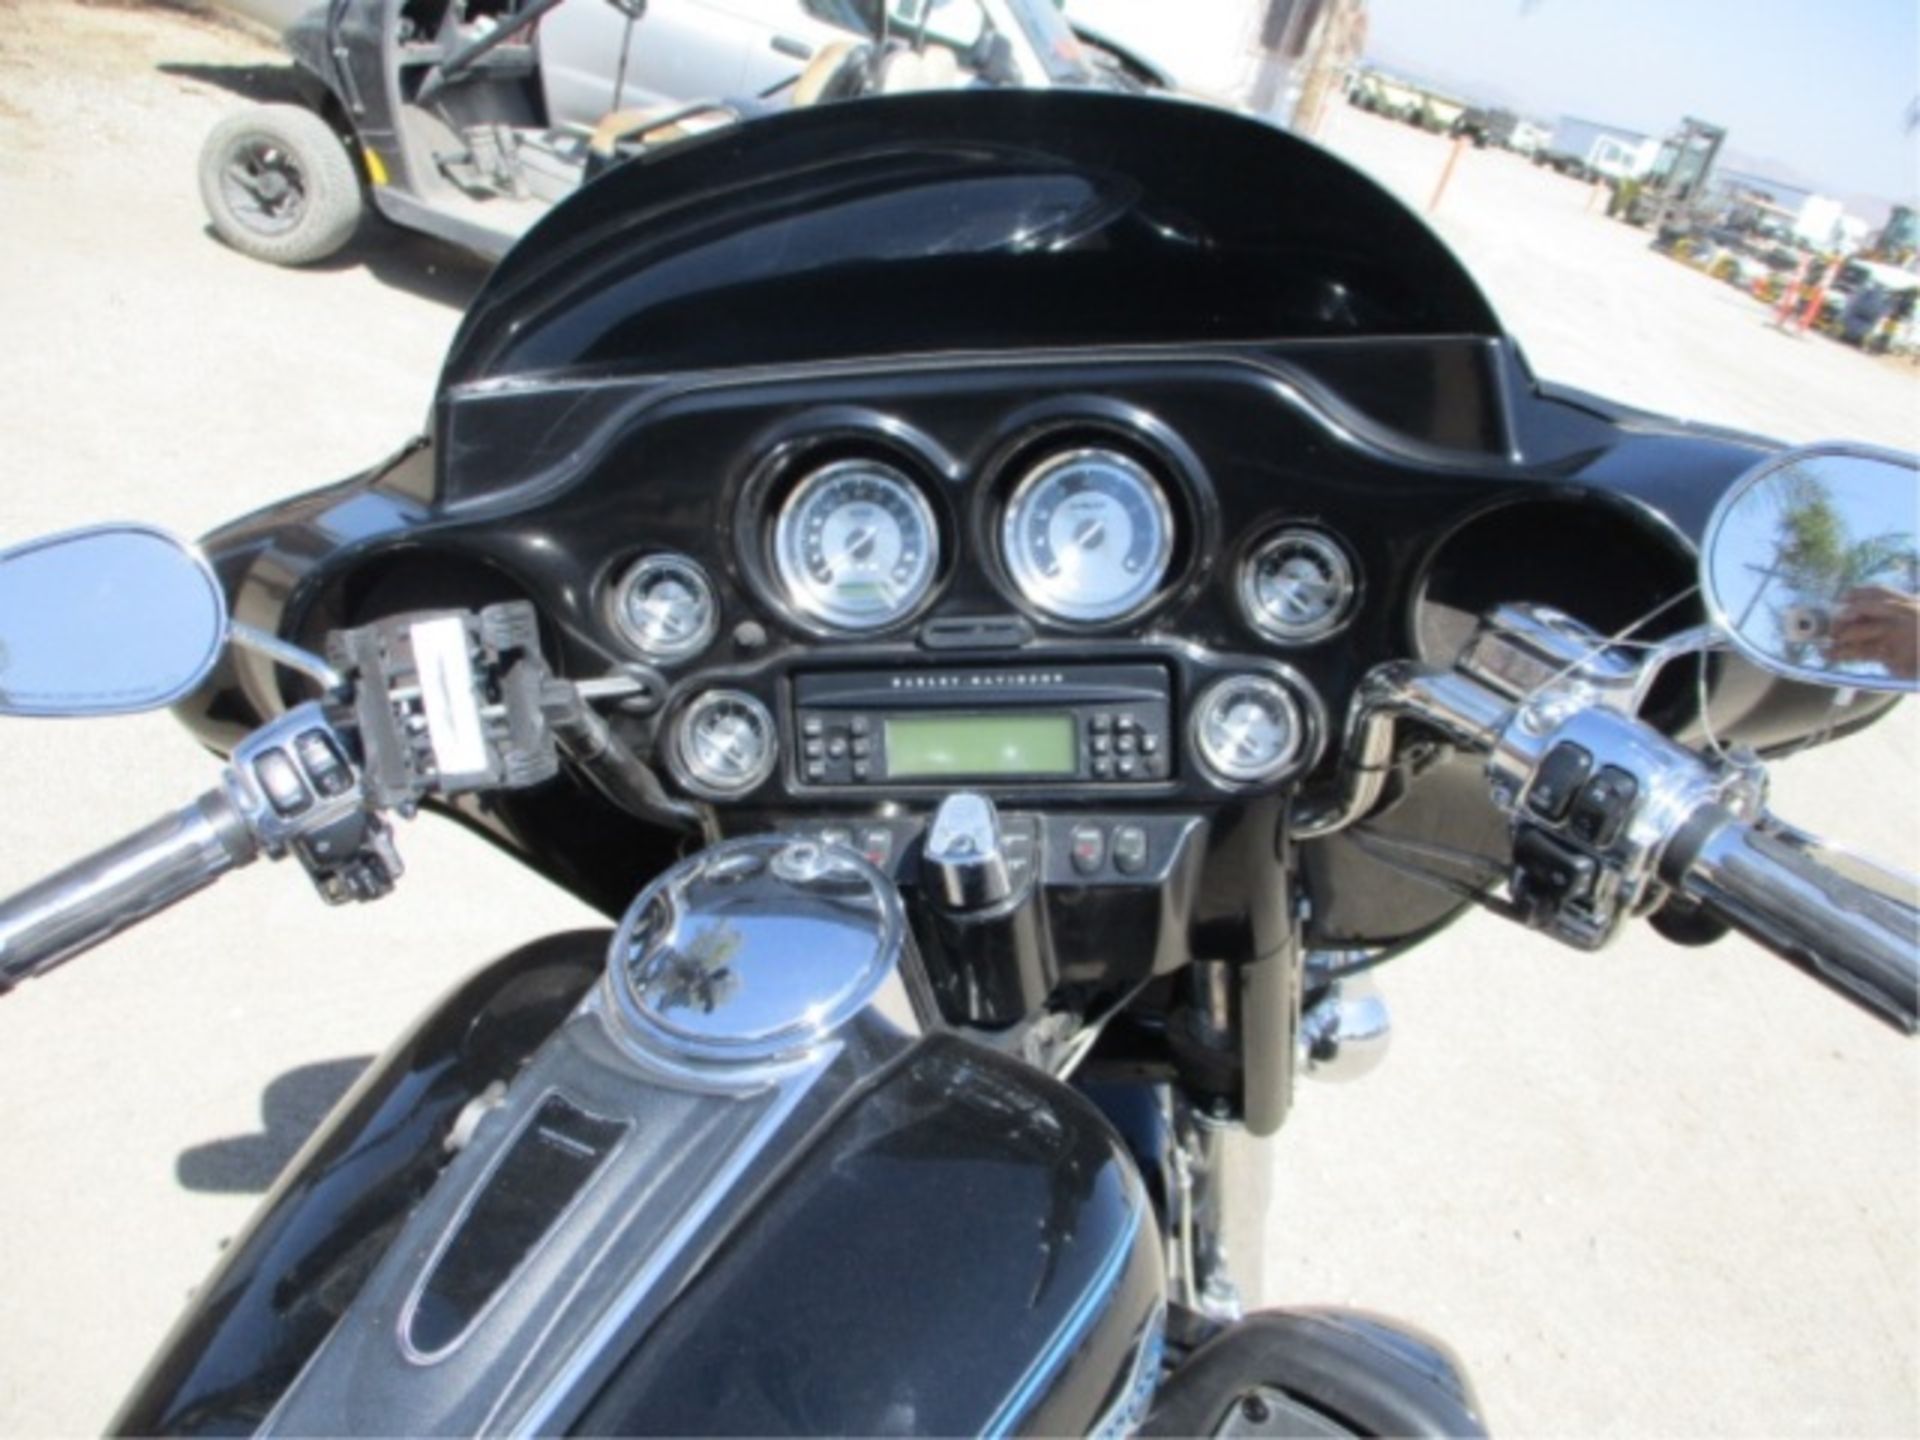 2006 Harley Davidson Electra Glide Motor Cycle, Ultra Classic, 1450cc Gas, External Speakers, - Image 19 of 44